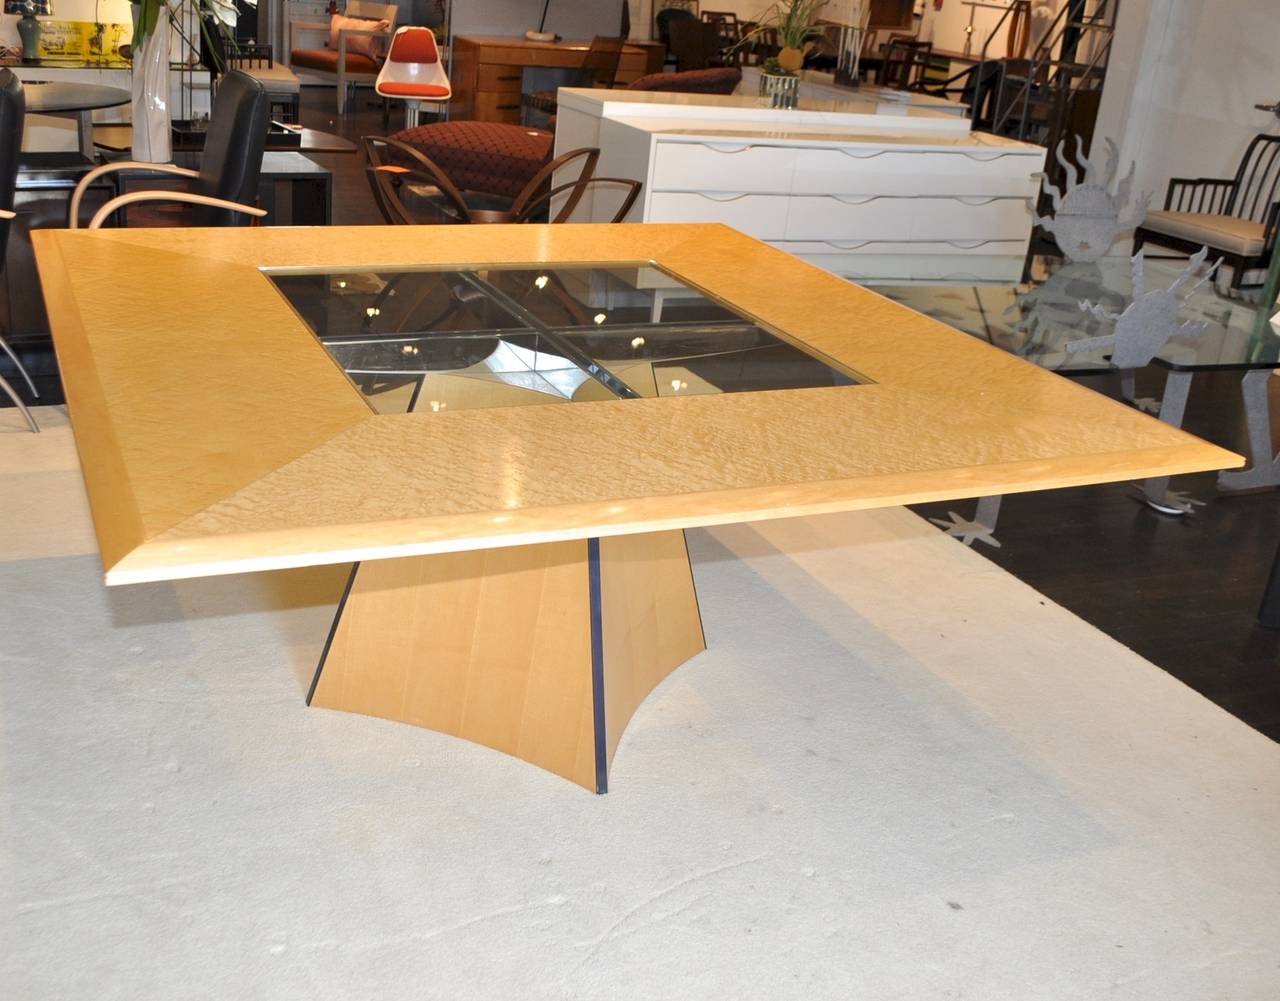 A striking square dining table for eight made from birds-eye maple veneers with polished chrome cross bars supporting a glass topped centre. Made by boutique cabinet makers Senior & Carmichael of Benchworth, England.